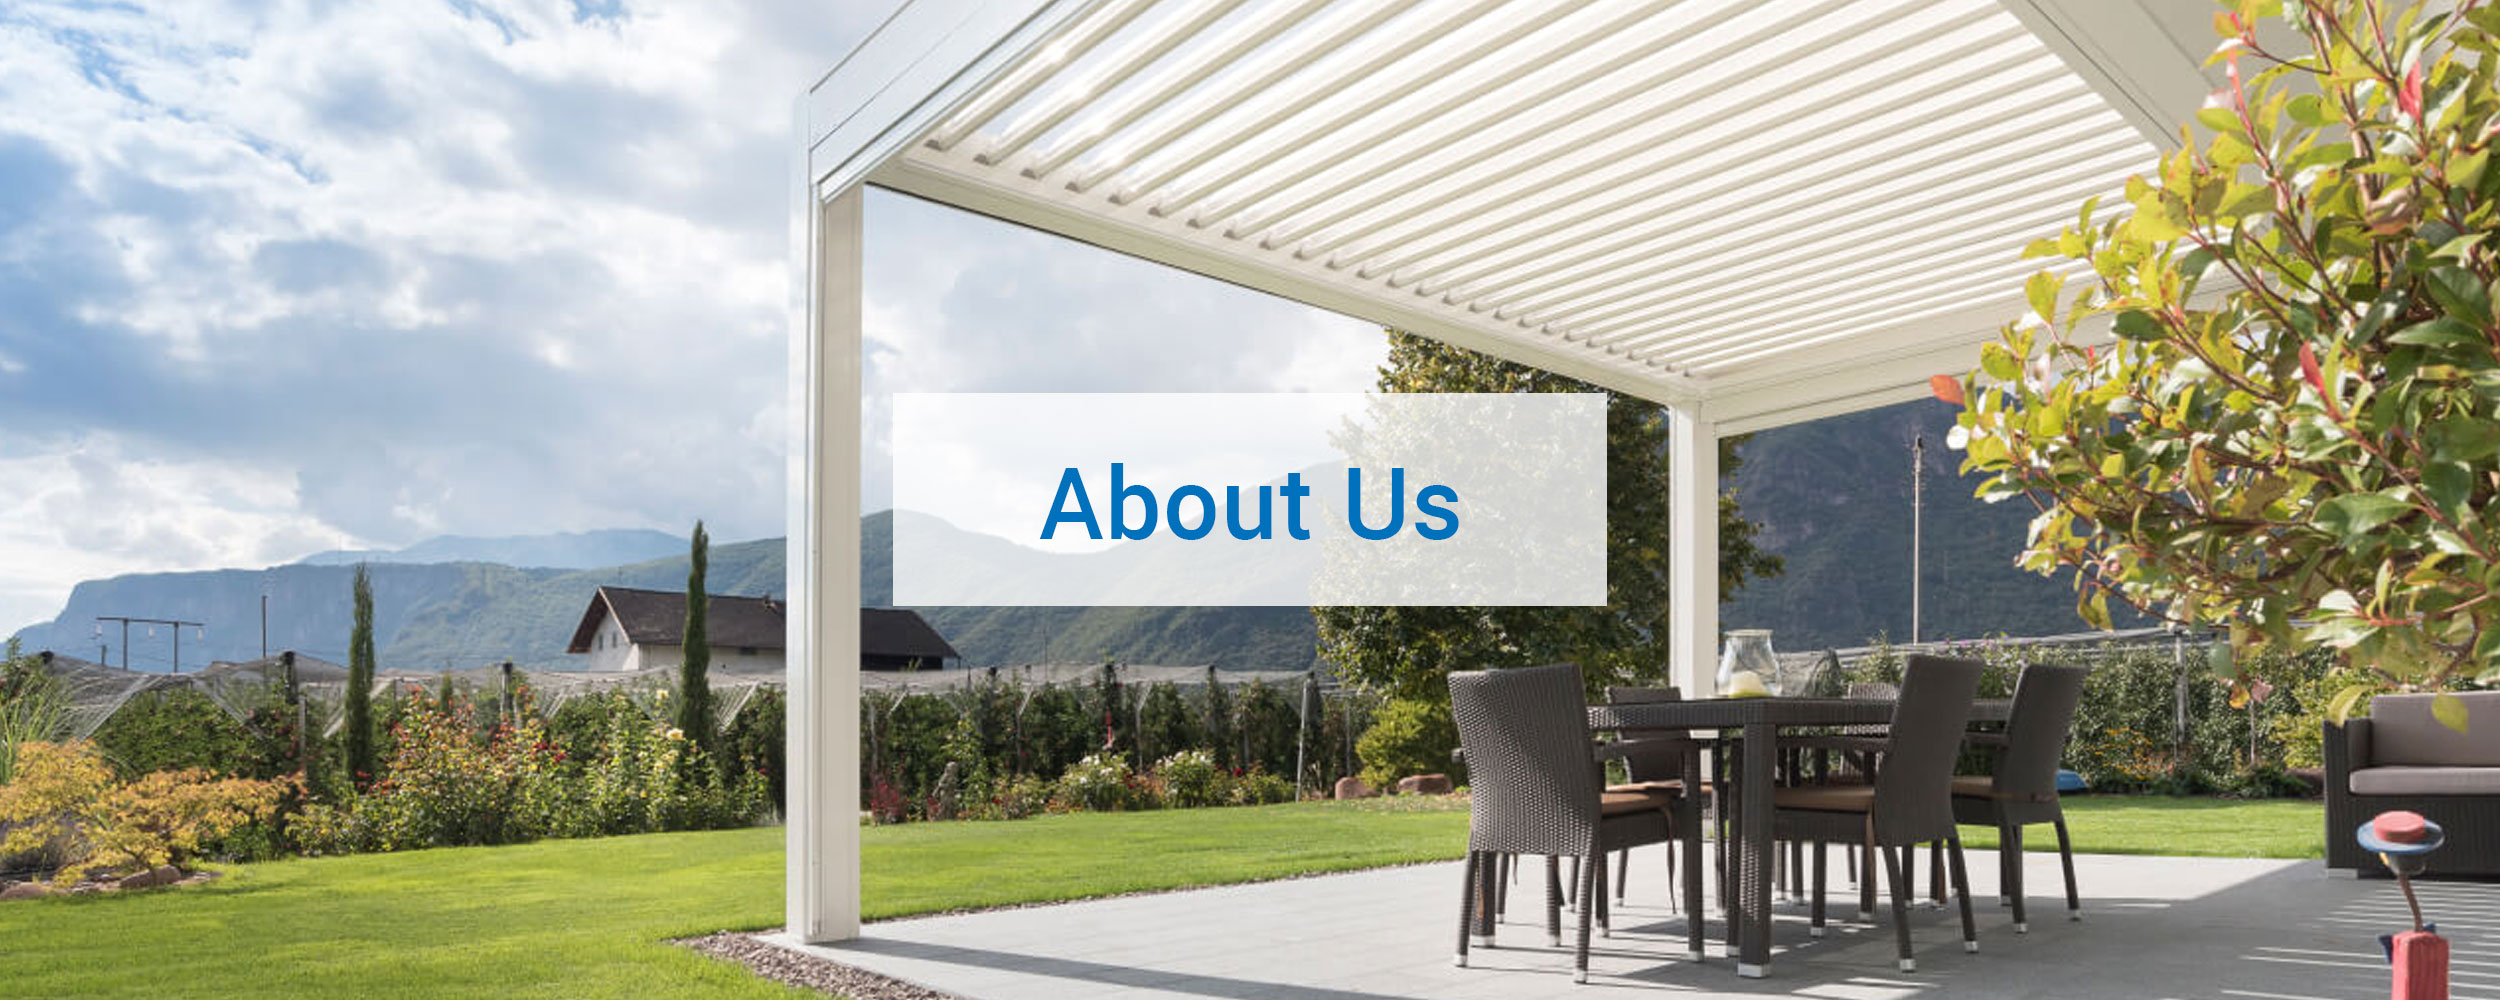 "About Us" text box over KE outdoor shade system image